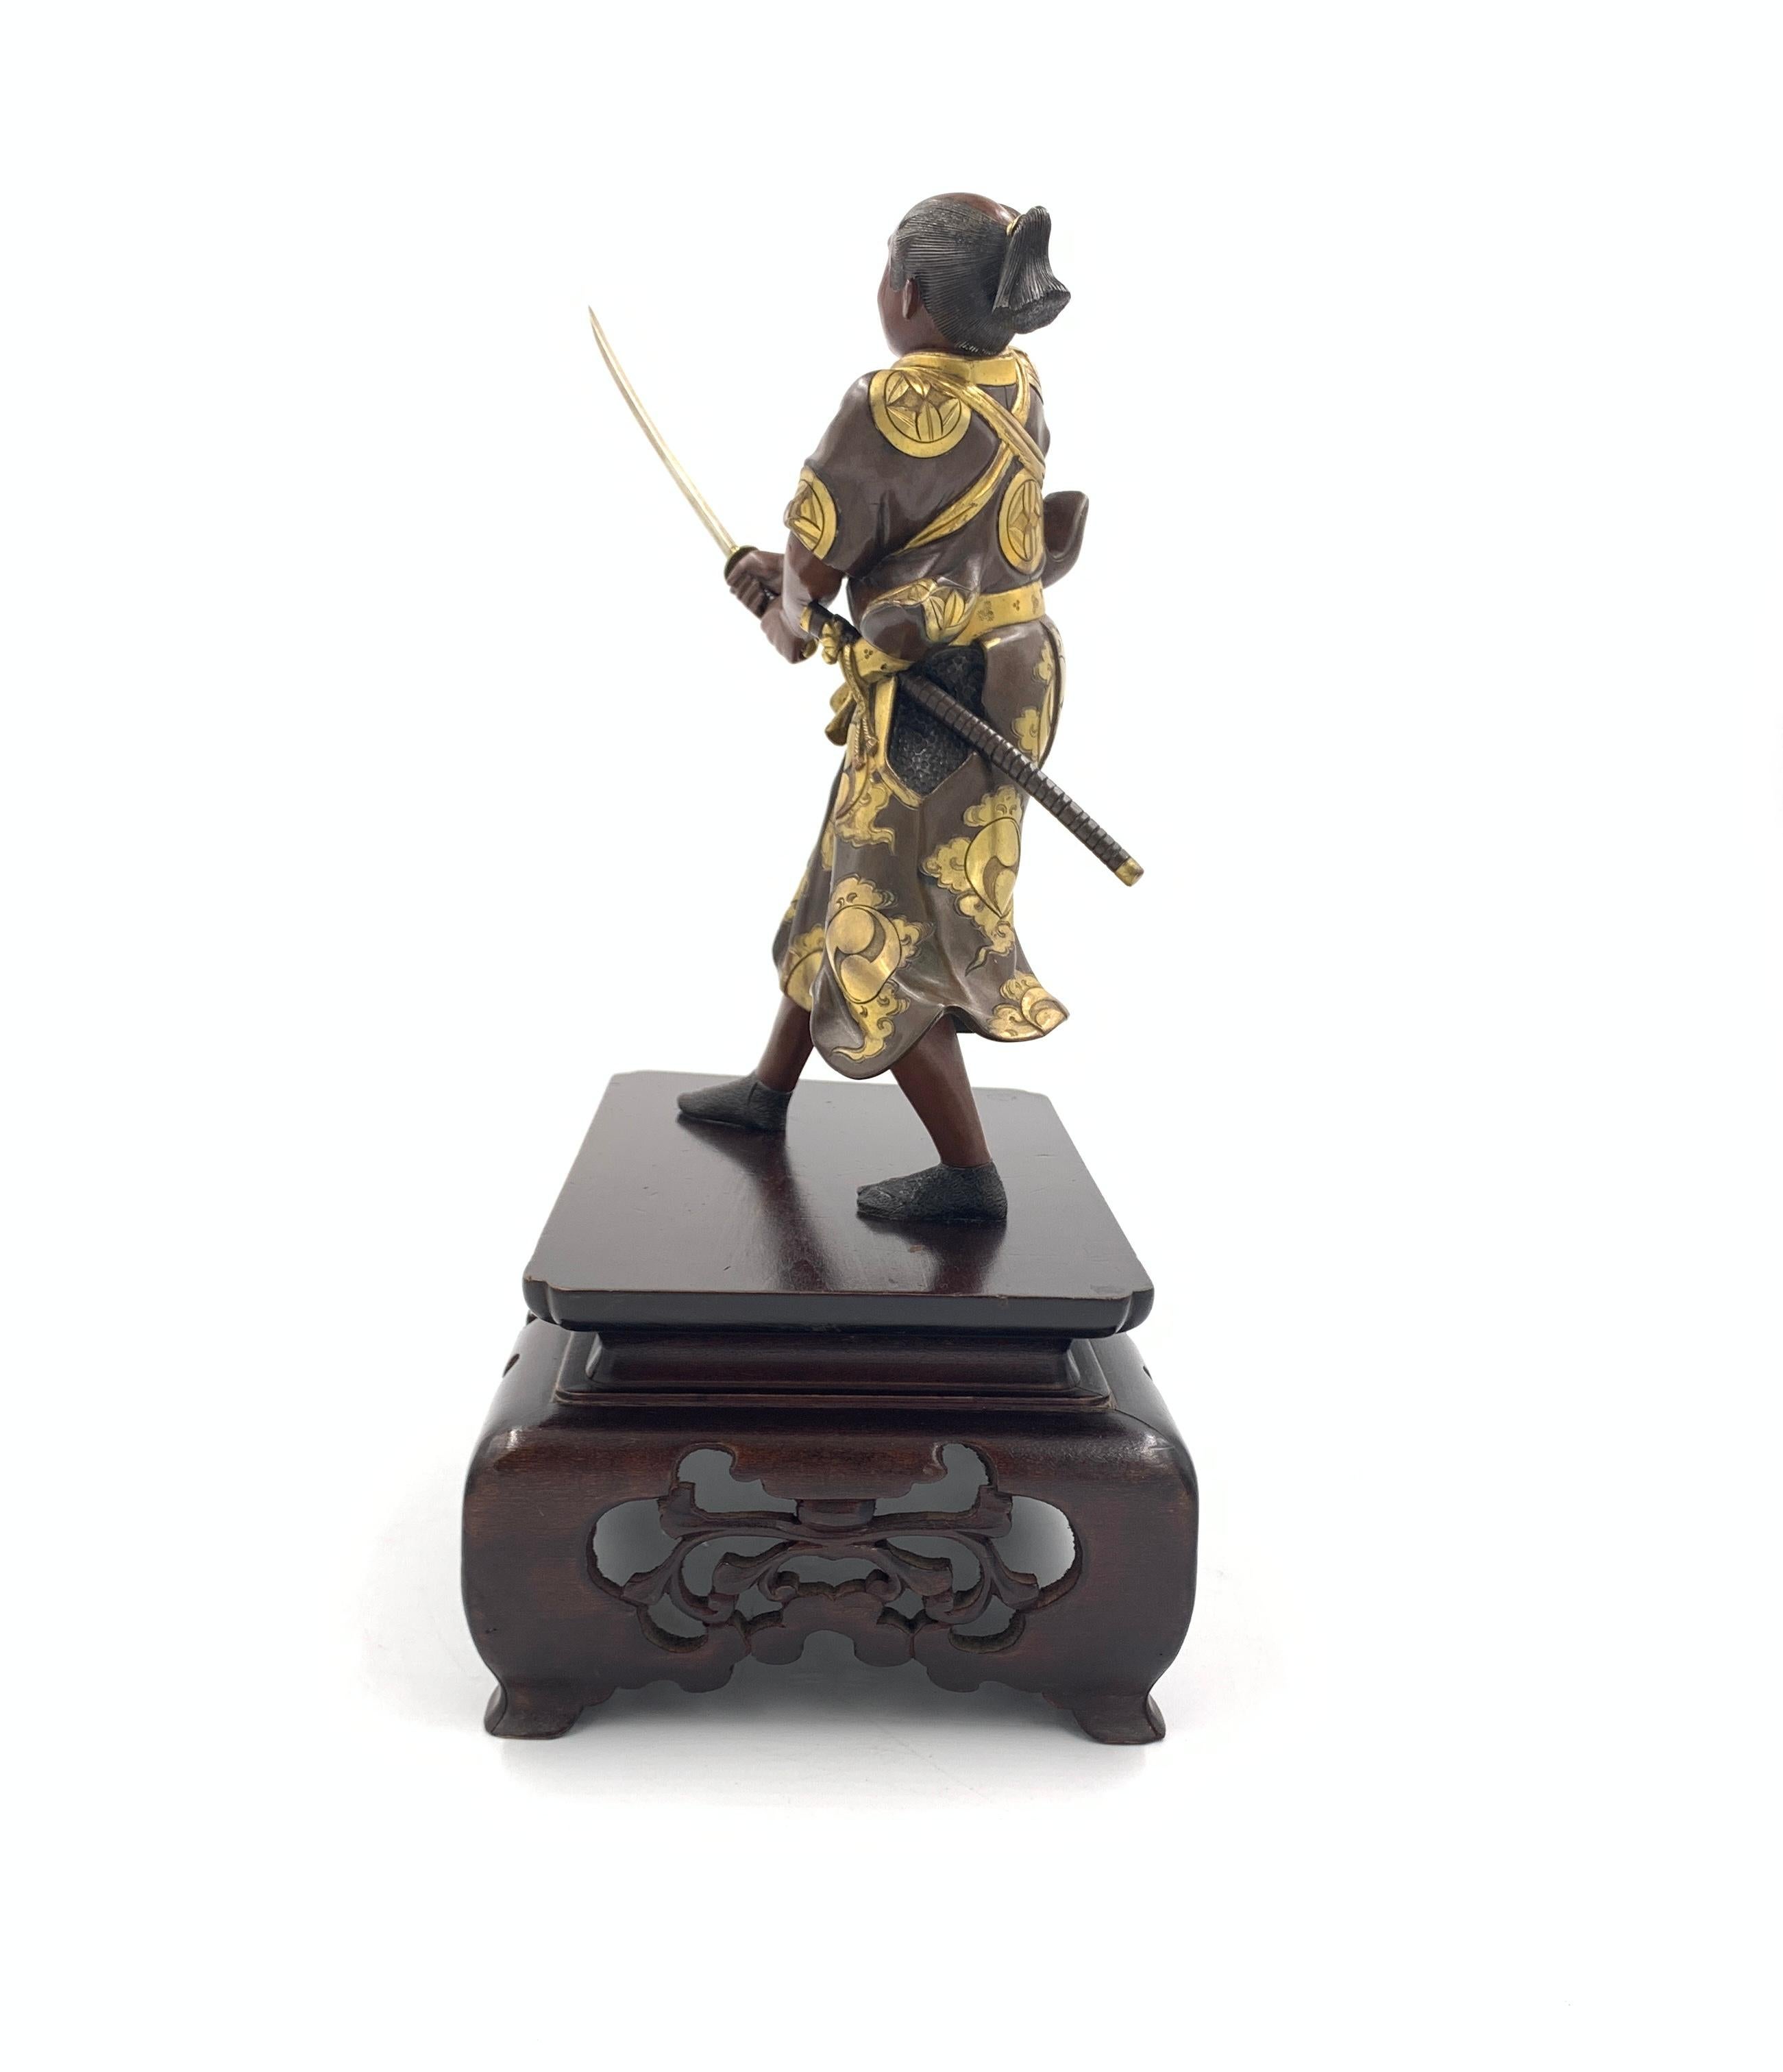 A fine signed Japanese bronze Samurai warrior advancing with a katana, wearing a richly decorated ornate robe, Meiji Period.
   